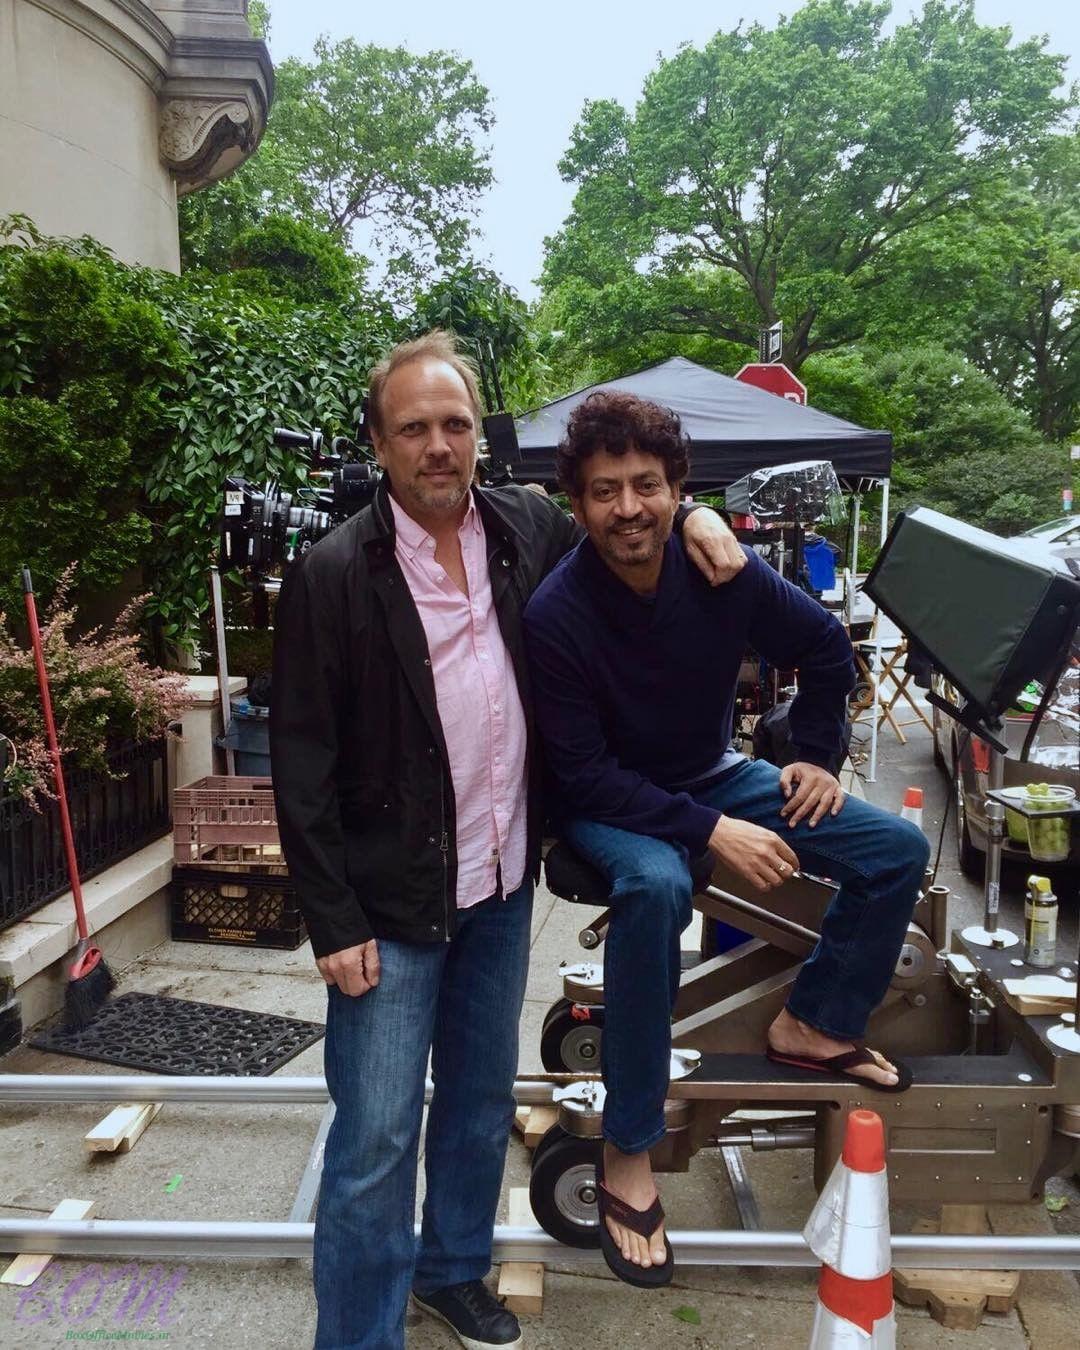 Irrfan Khan with cameraman Chris while shooting for The Puzzle movie